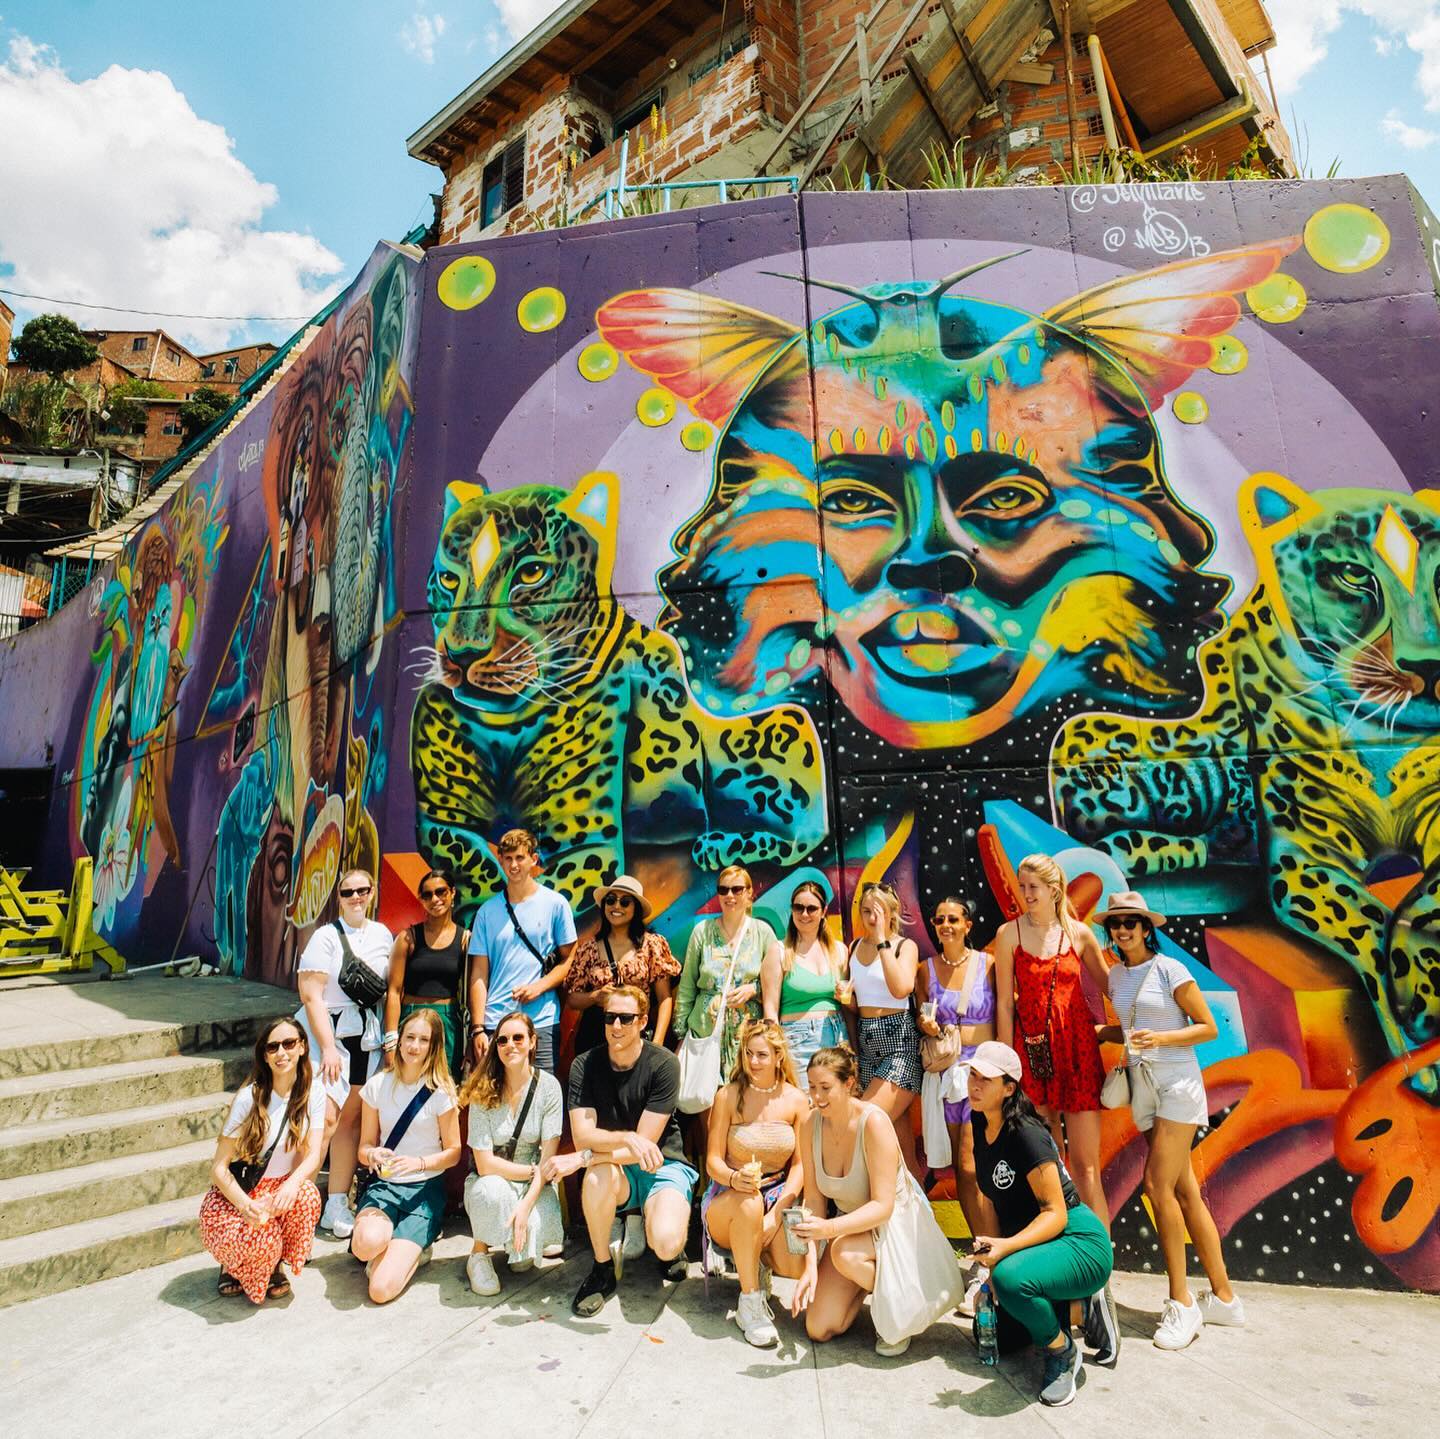 Uncovering the beauty and magic of Comuna 13😍 What used to be one of the most dangerous communities in the world and is now best know for its colourful graffiti, amazing performances and incredible energy✨ a must do when in Medellin, Colombia🇨🇴
•
•
•
•
•
#comuna13 #comuna13graffititour #comuna13demedellín #colombiatravel #colombiatravel #madellin #colombiatours #grouptravel